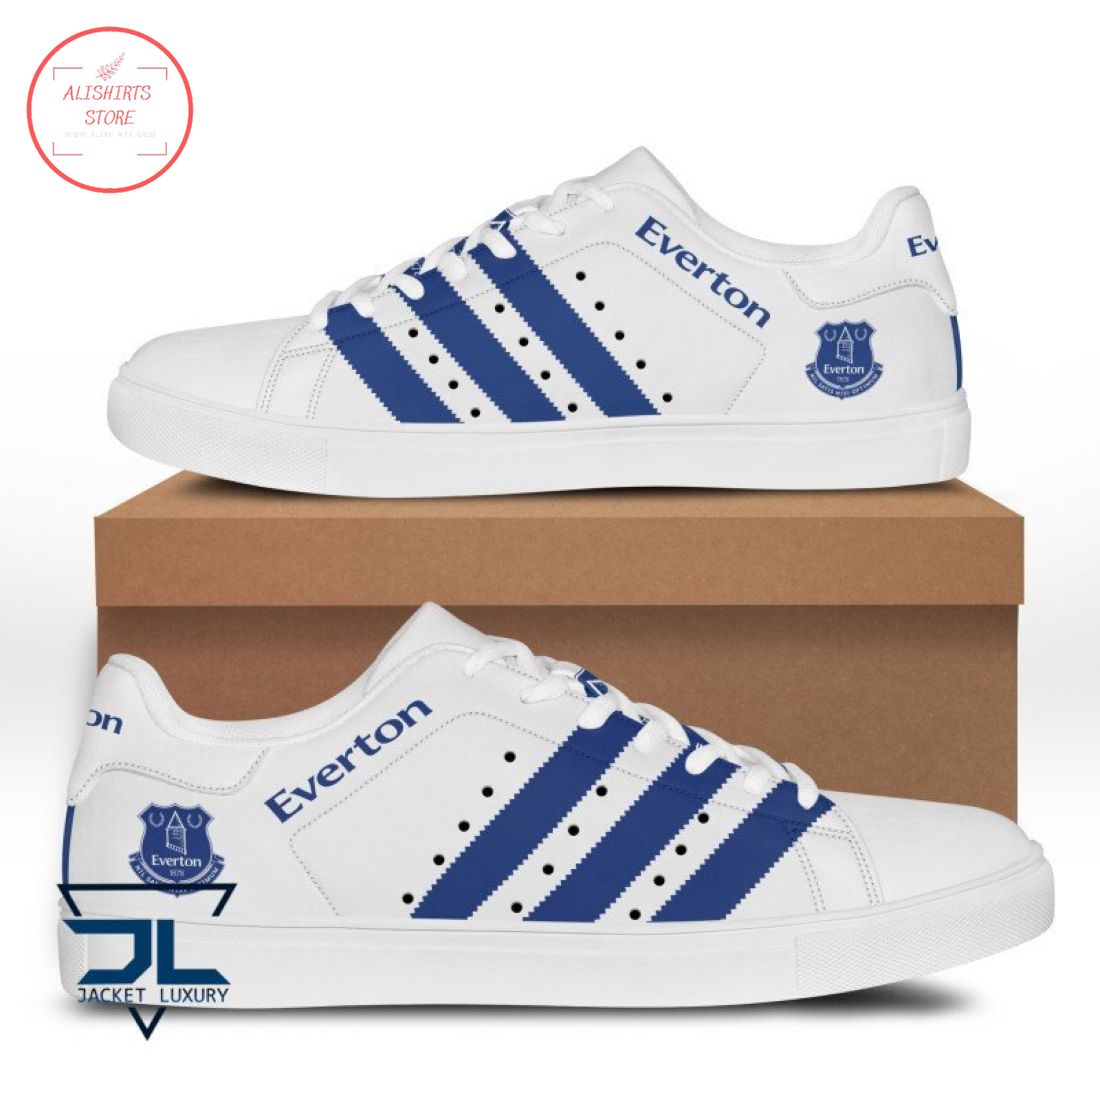 EPL Everton FC Stan Smith Shoes